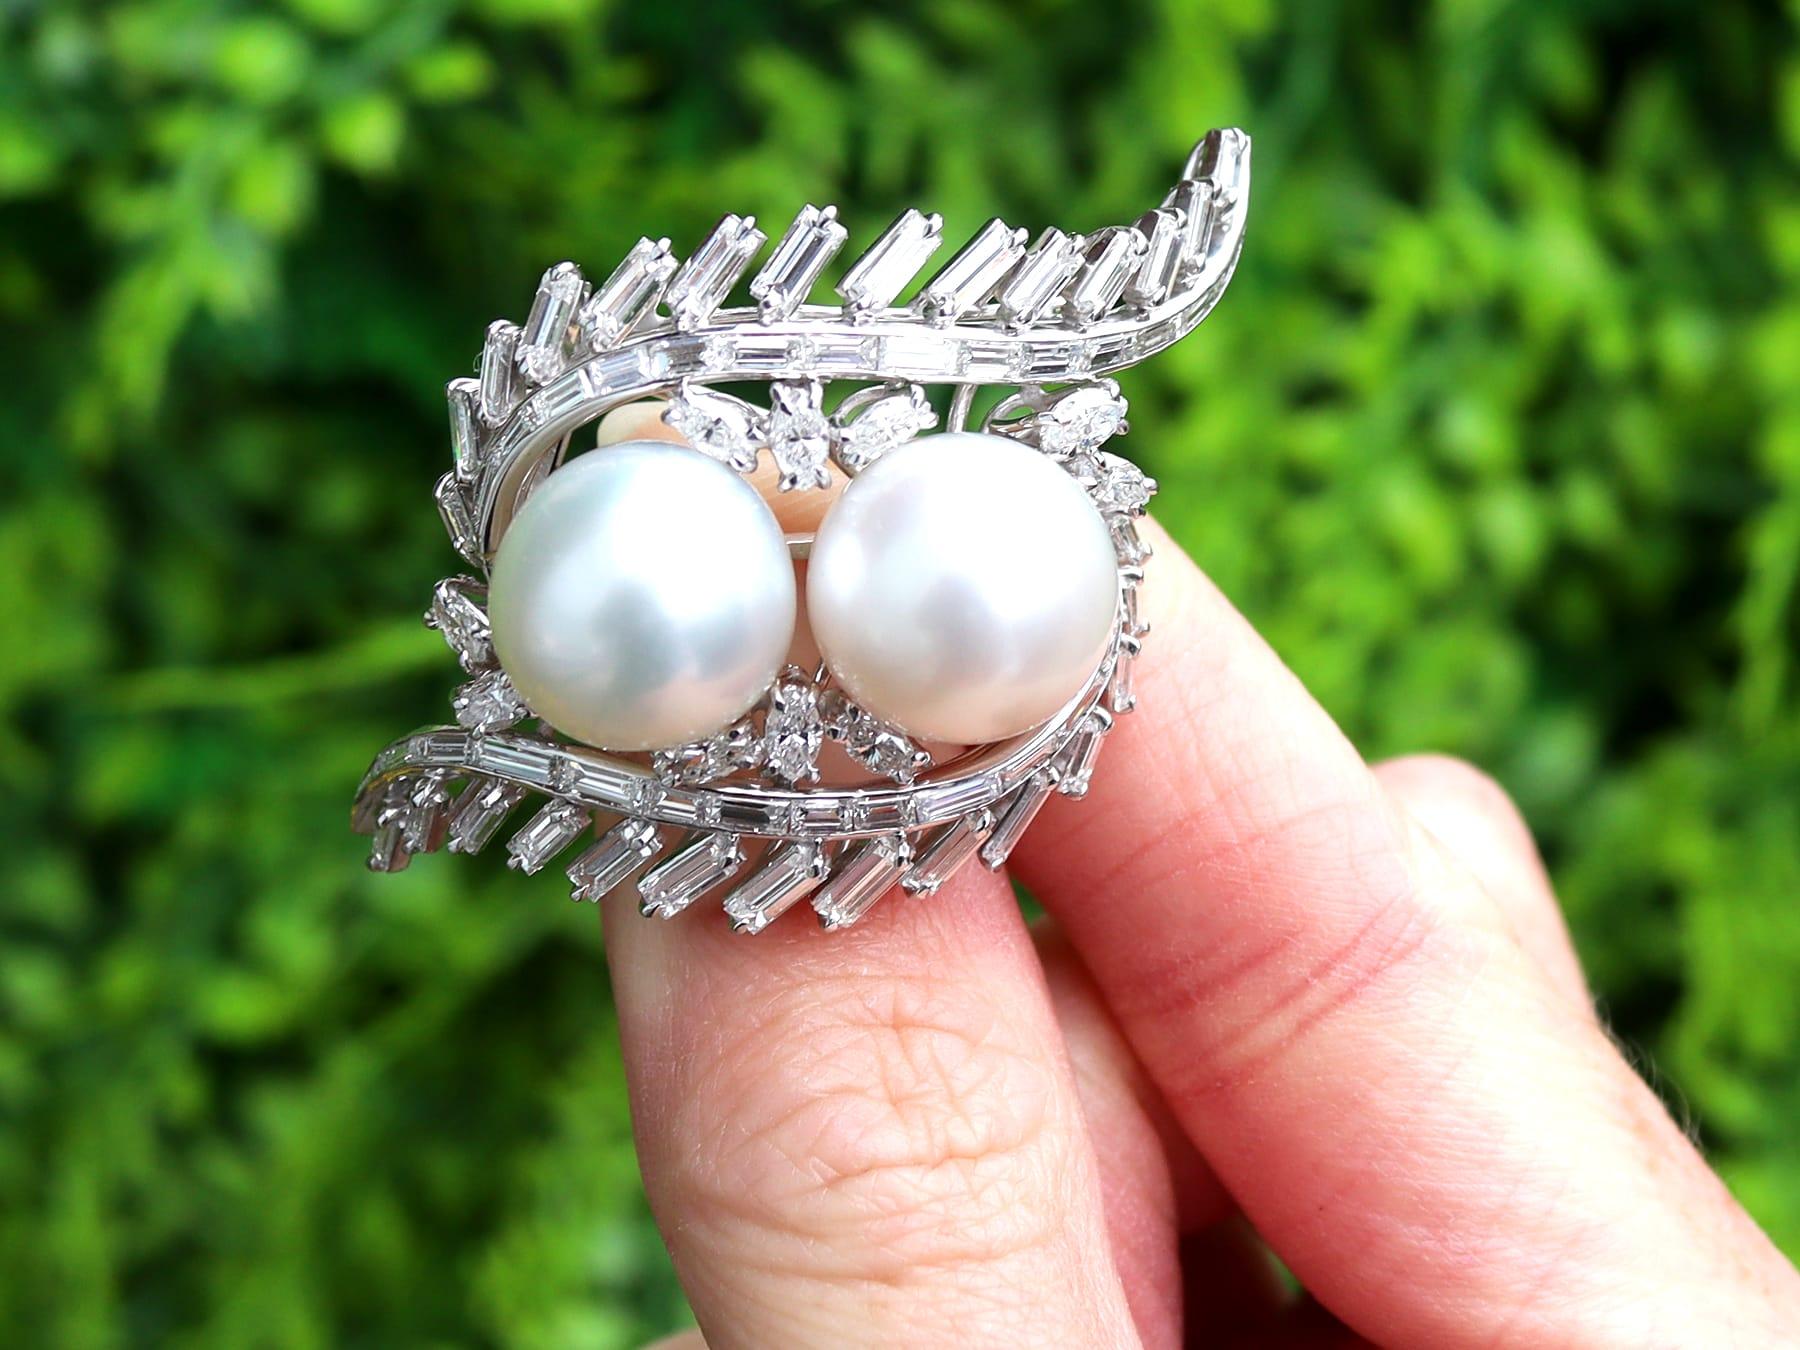 A stunning, fine and impressive vintage South Sea pearl and 4.16 carat diamond, platinum and 12 karat white gold brooch; part of our diverse vintage pearl jewelry and estate jewelry collections.

This stunning, fine and impressive South Sea pearl